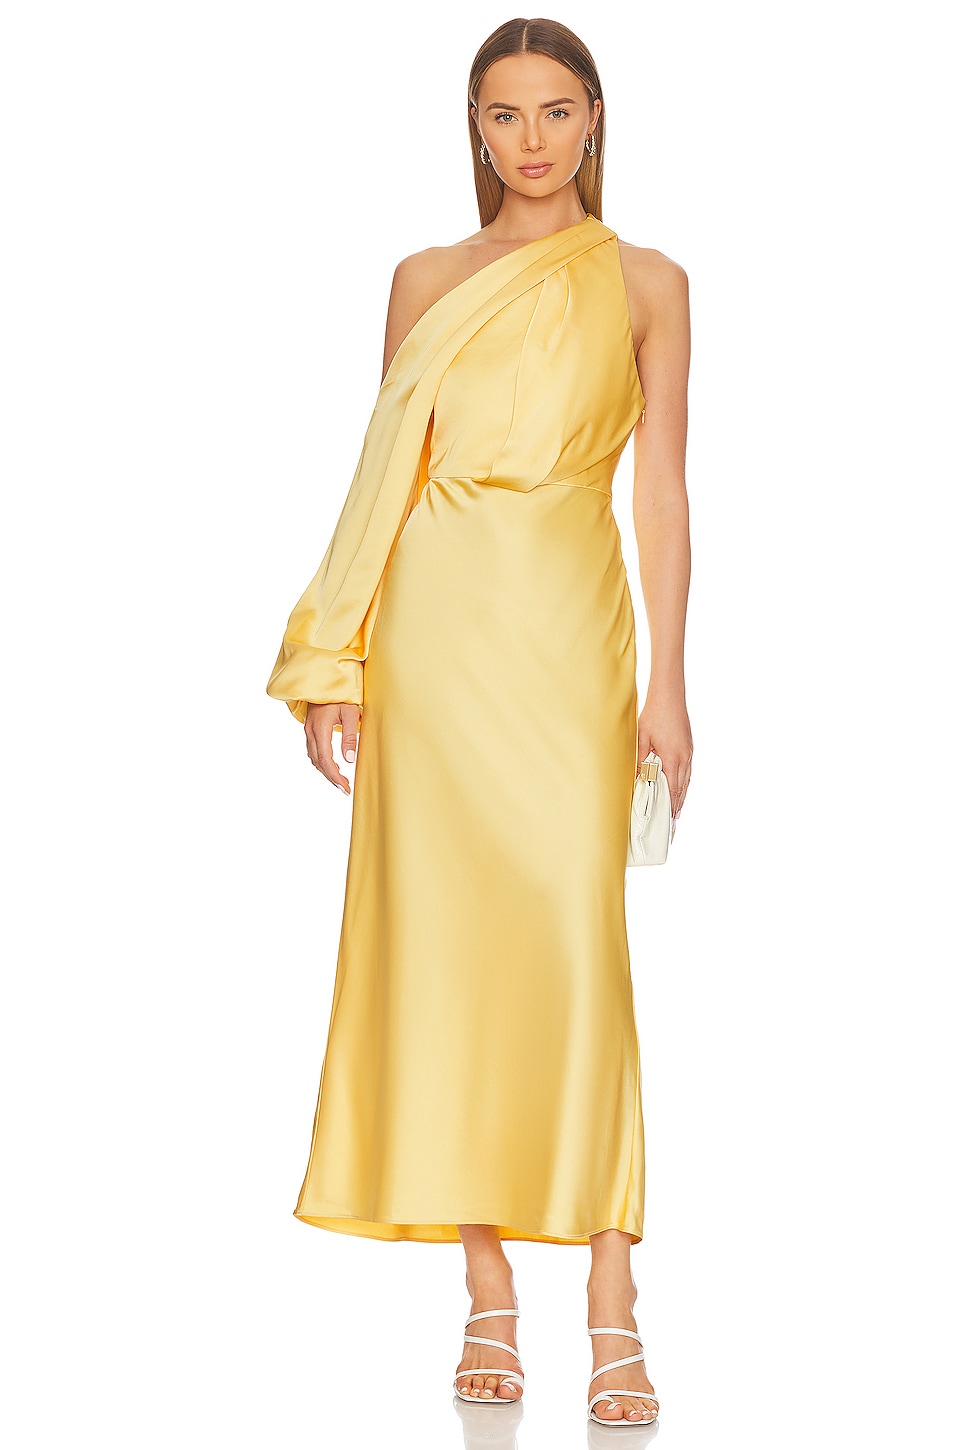 Significant Other Lana Dress in Lemon | REVOLVE